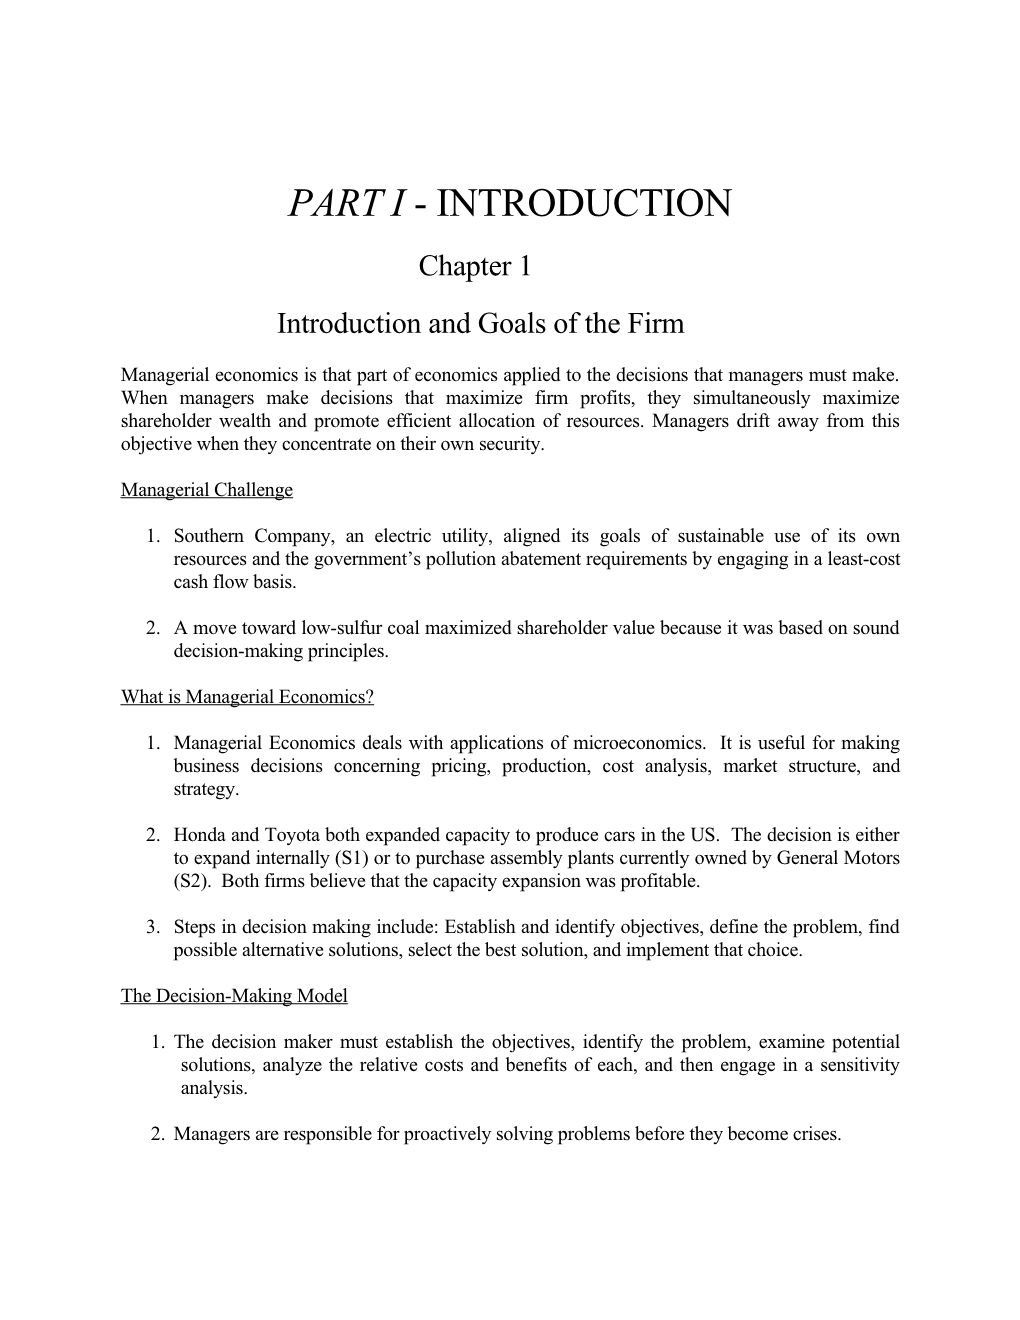 Introduction and Goals of the Firm